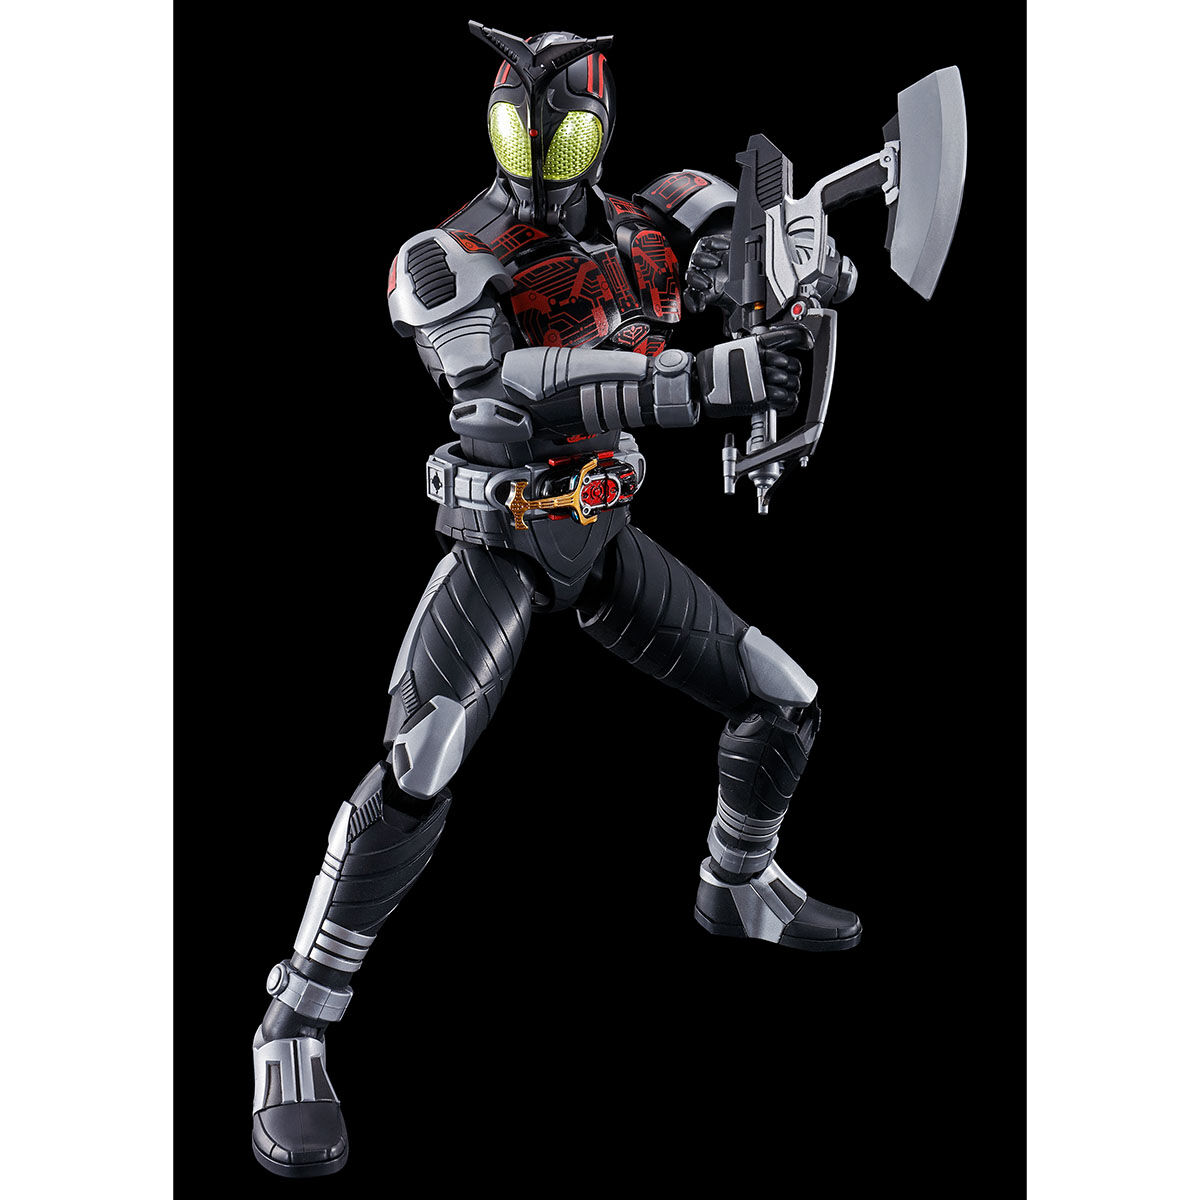 Get Ready! Figure-rise Standard MASKED RIDER DARK KABUTO will be Available for Pre-Order today, June 14 at 9:00 PM (EDT) on Premium Bandai USA!!

- Figure-rise Standard MASKED RIDER DARK KABUTO

ow.ly/jH8q50OMp67

#KamenRider #PremiumBandai